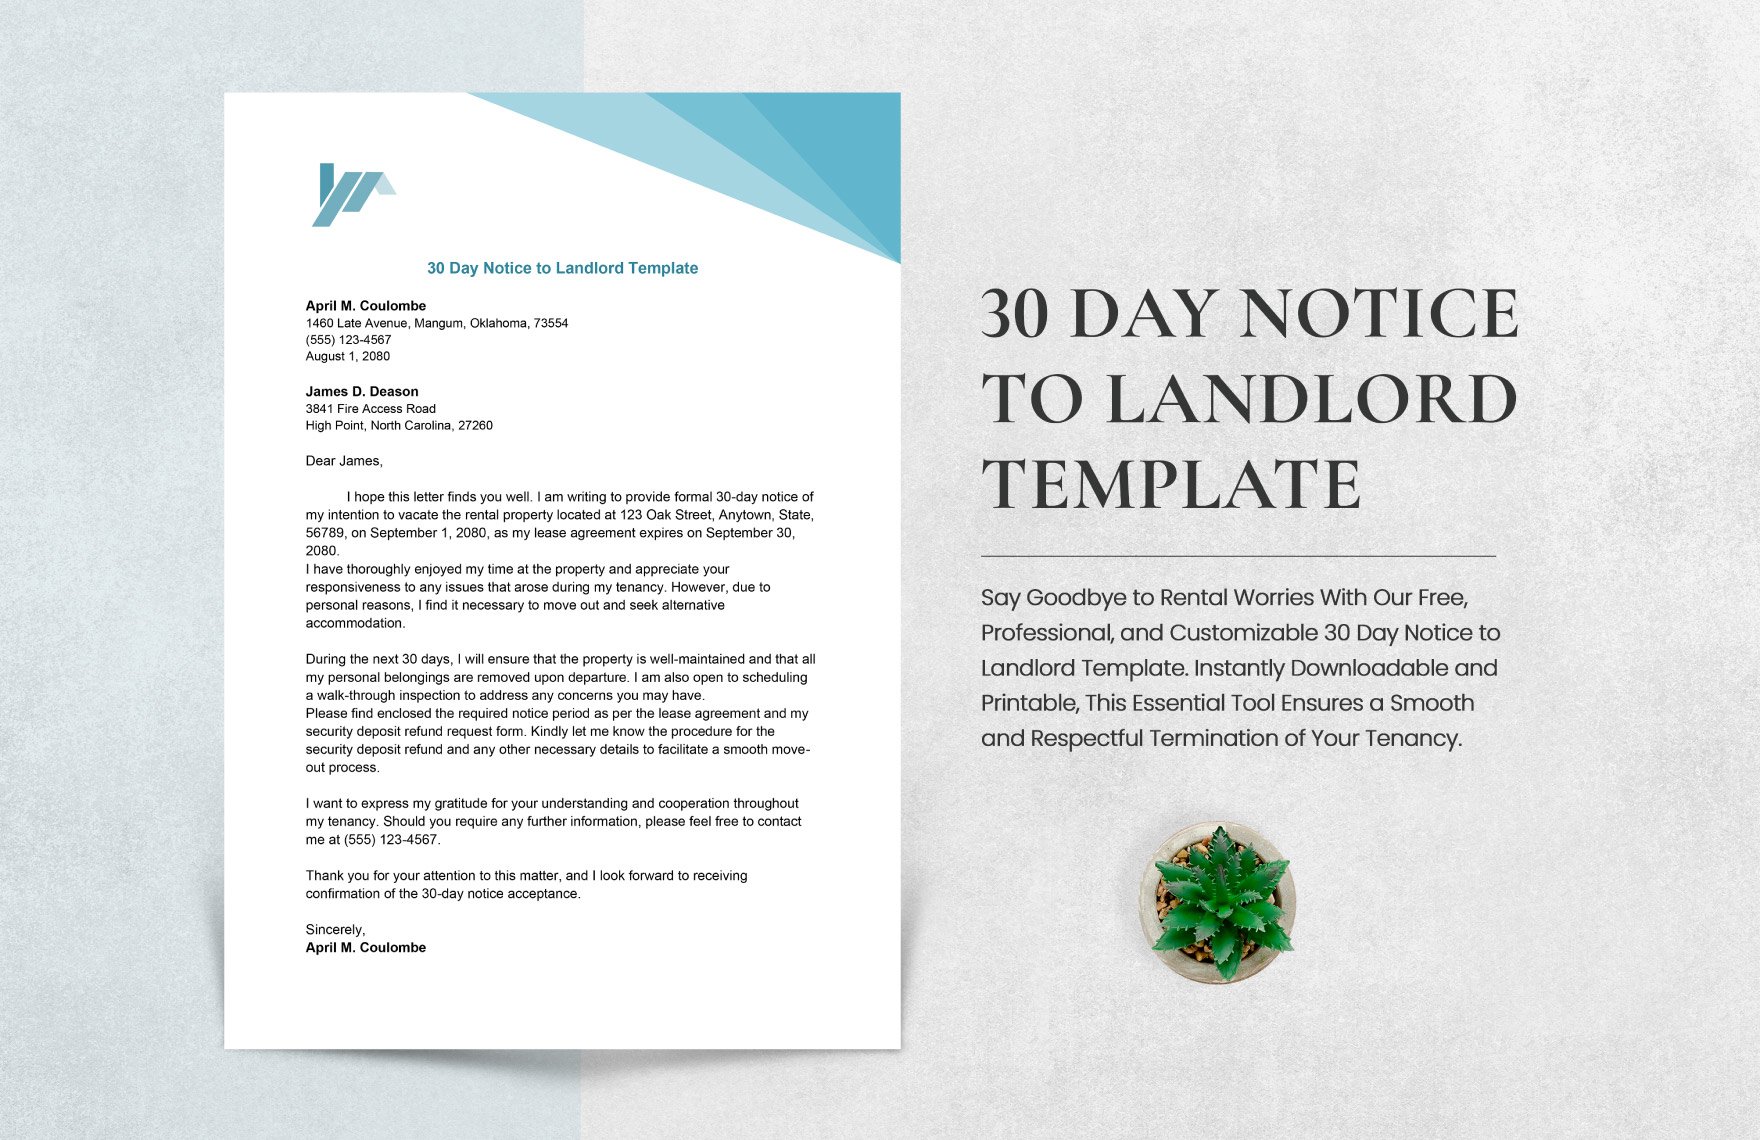 30 Day Notice to Landlord Template